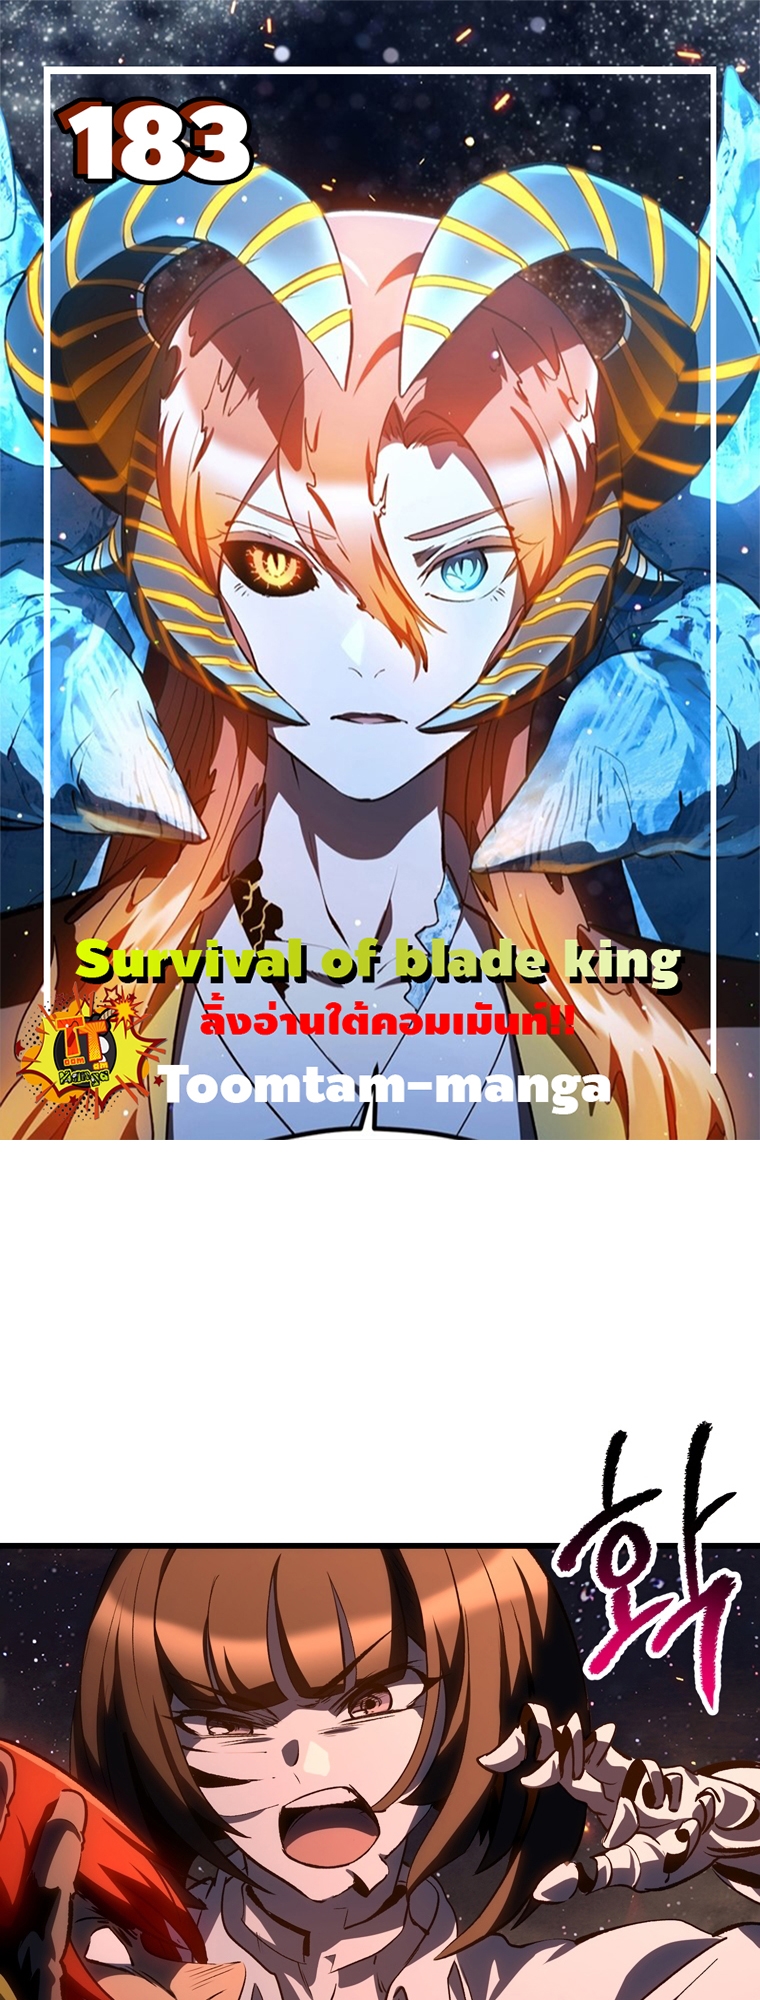 survival of blade king 183.01